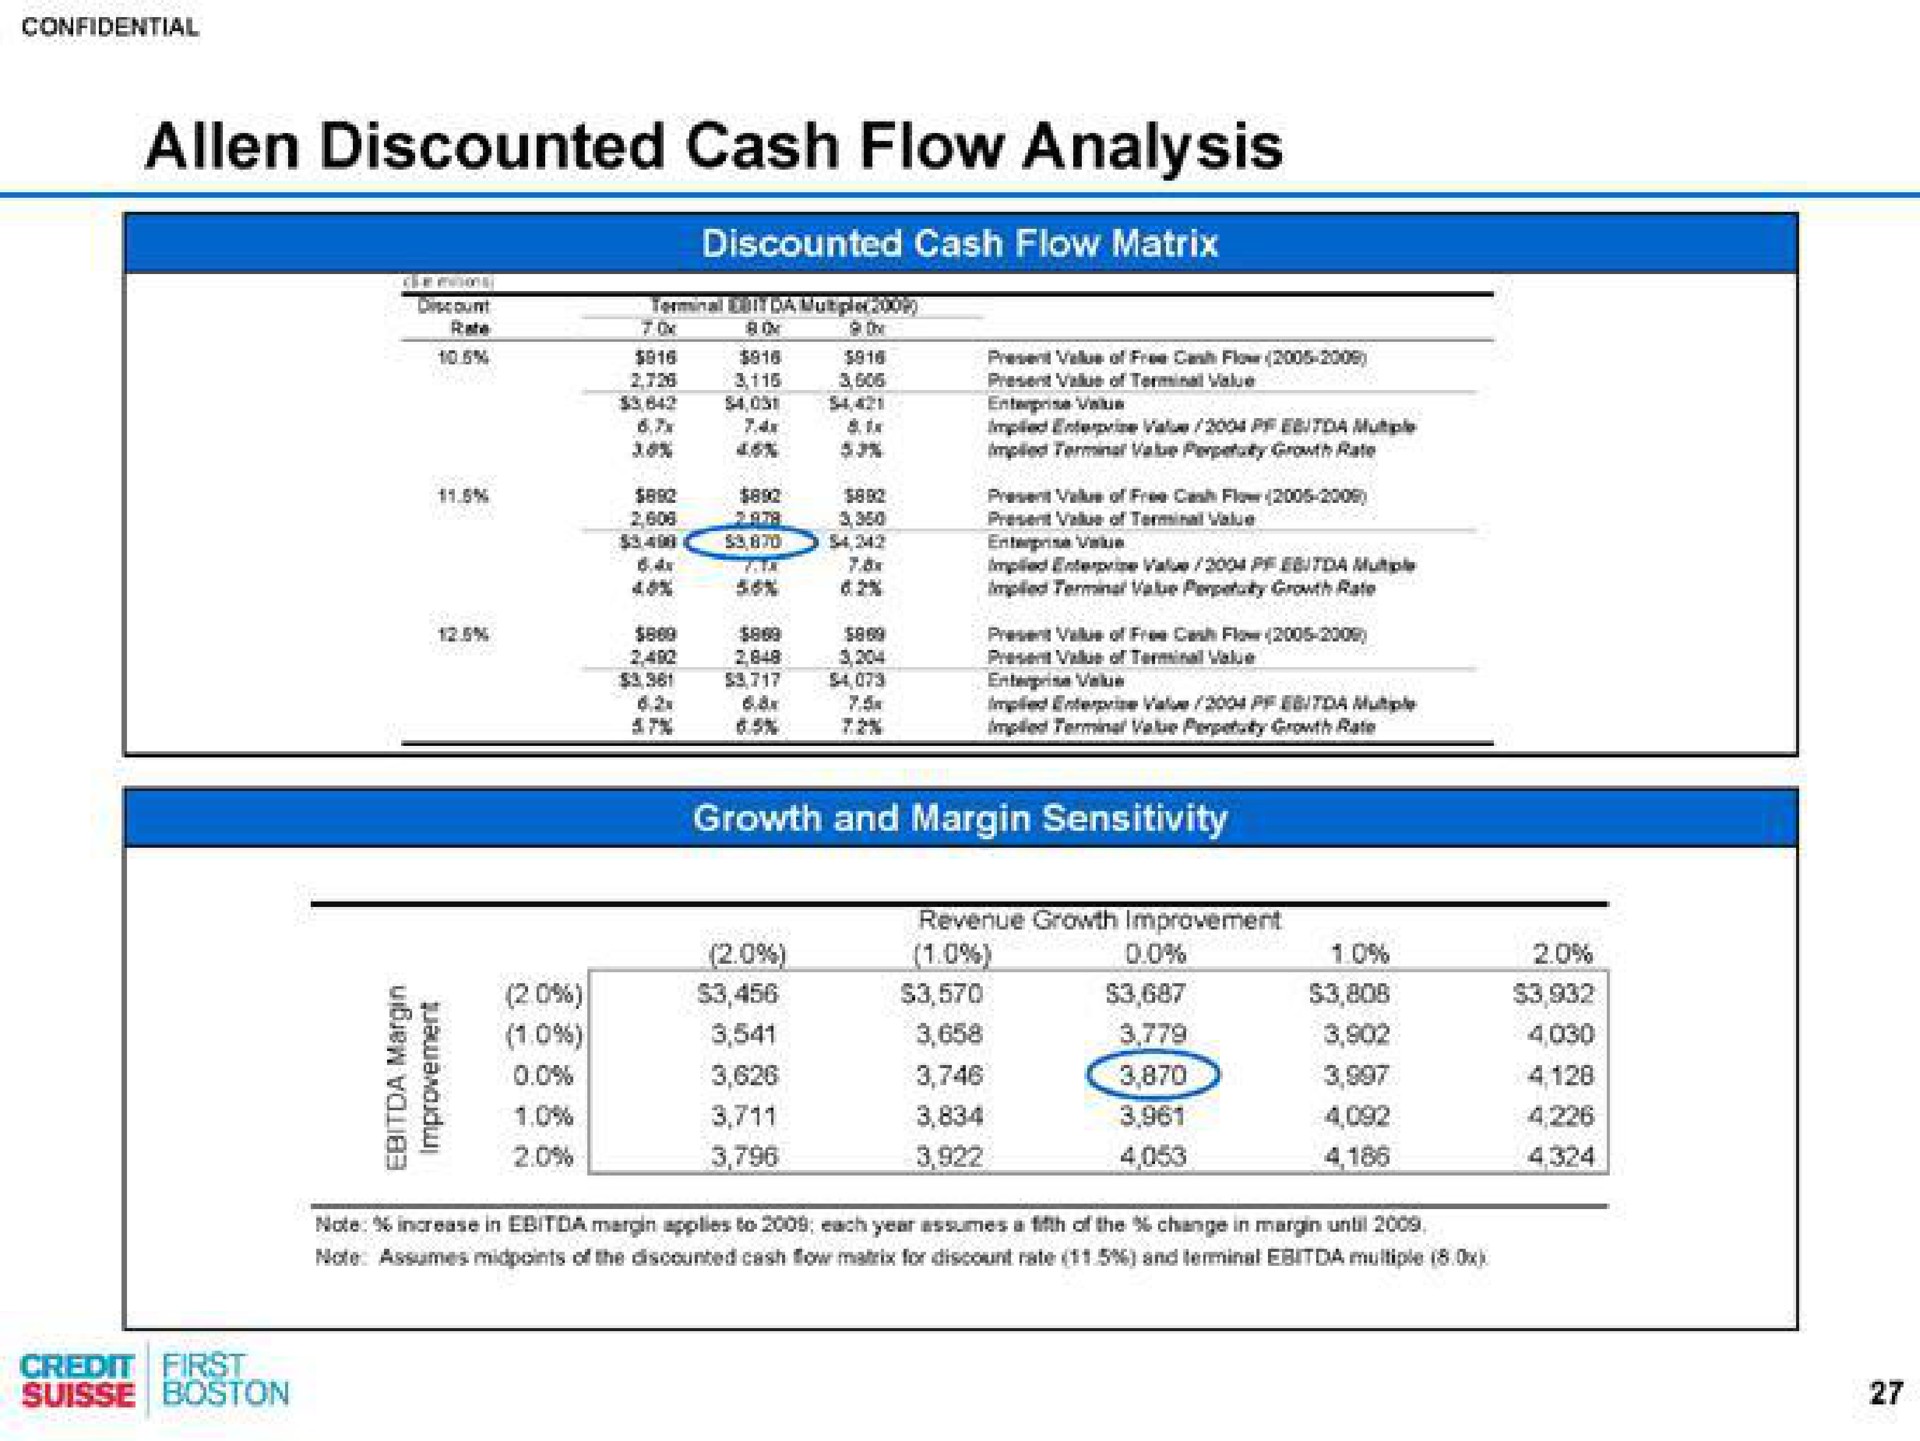 discounted cash flow analysis | Credit Suisse